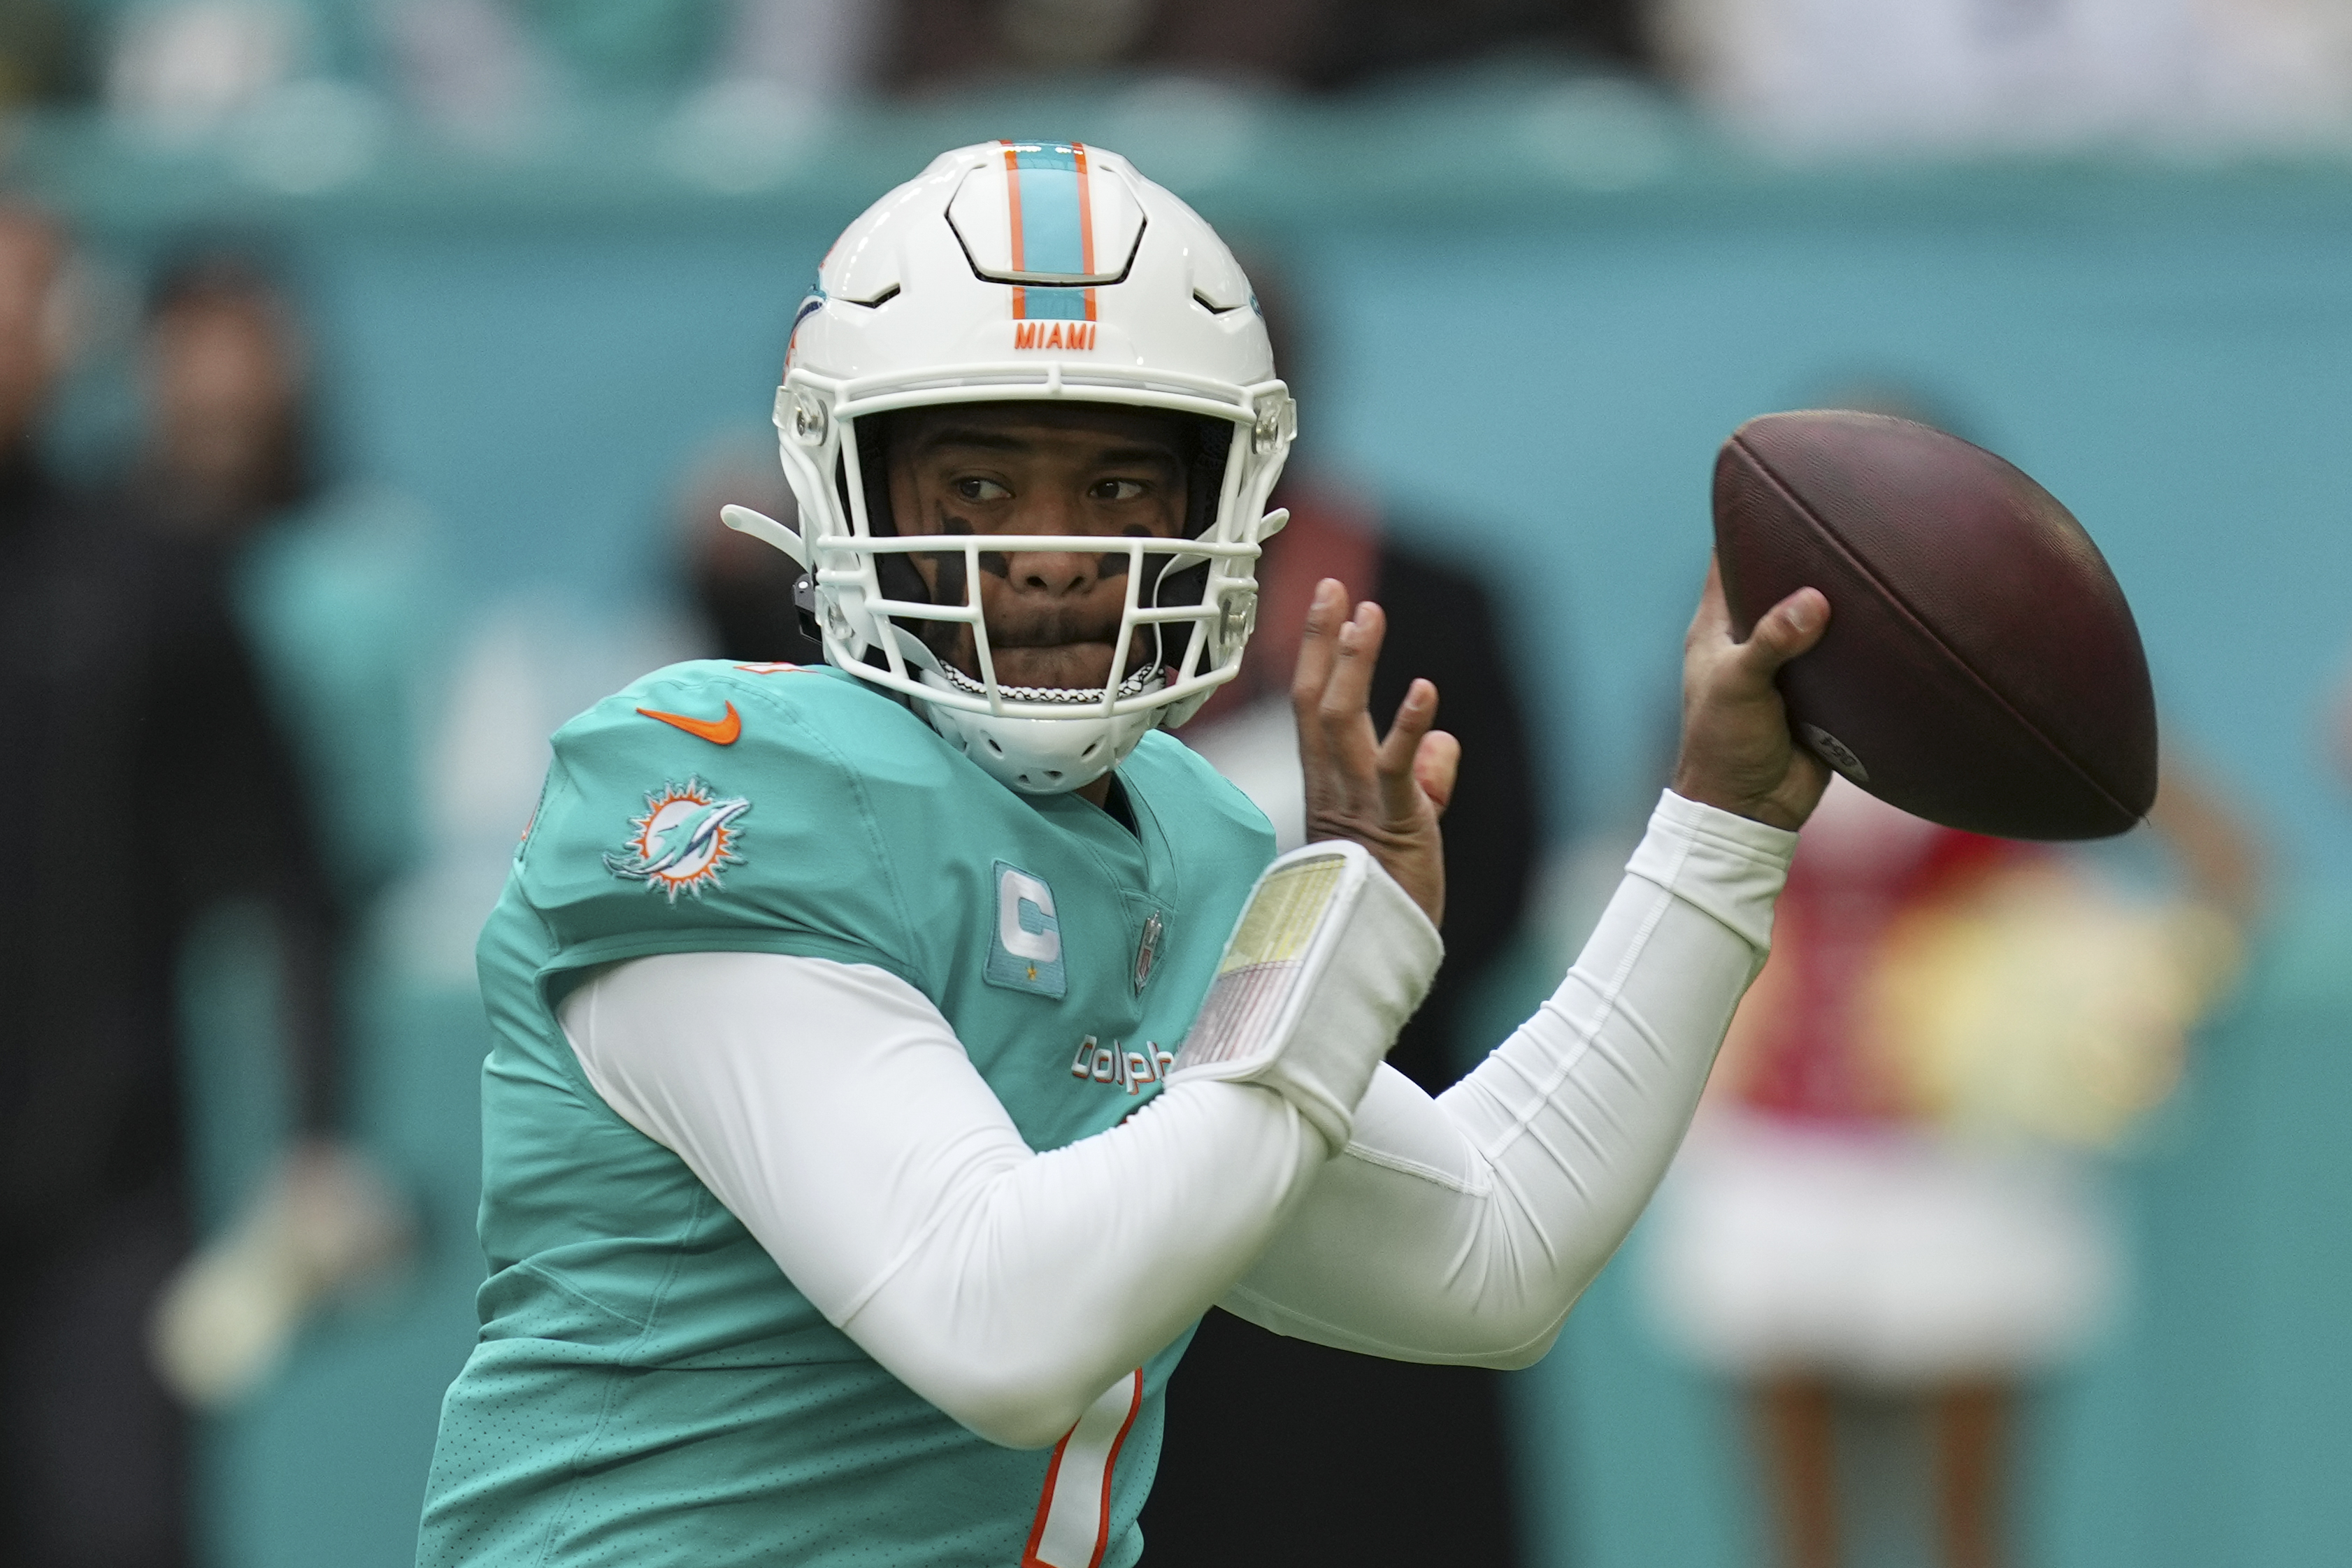 Teddy Bridgewater injury: Miami Dolphins QB out due to concussion